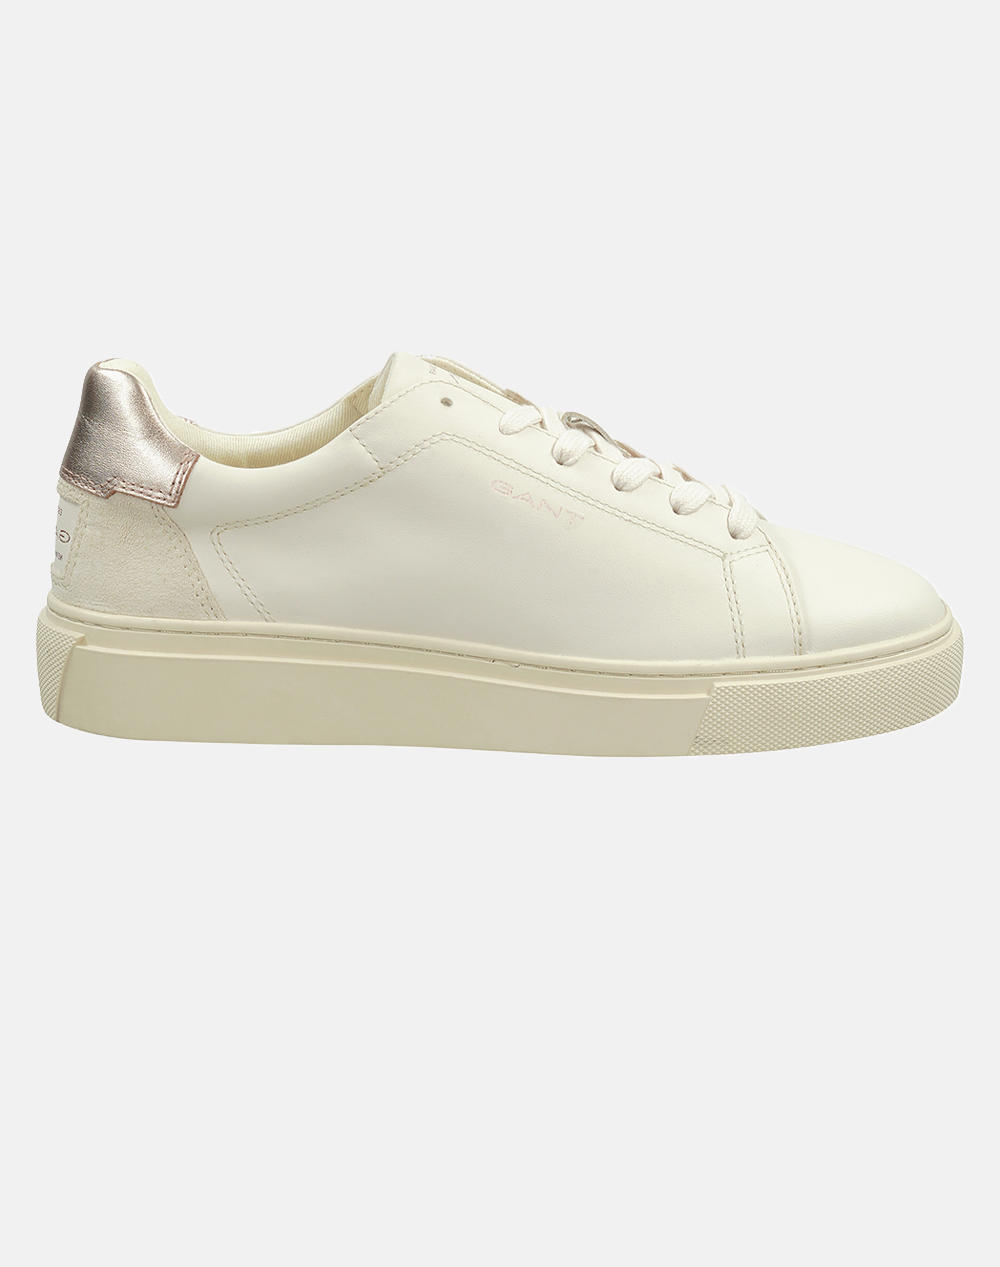 GANT ΥΠΟΔΗΜΑ ΓΥΝΑΙΚΕΙΟ JULICE JULICE JULICE 3GS28531495-130 OffWhite